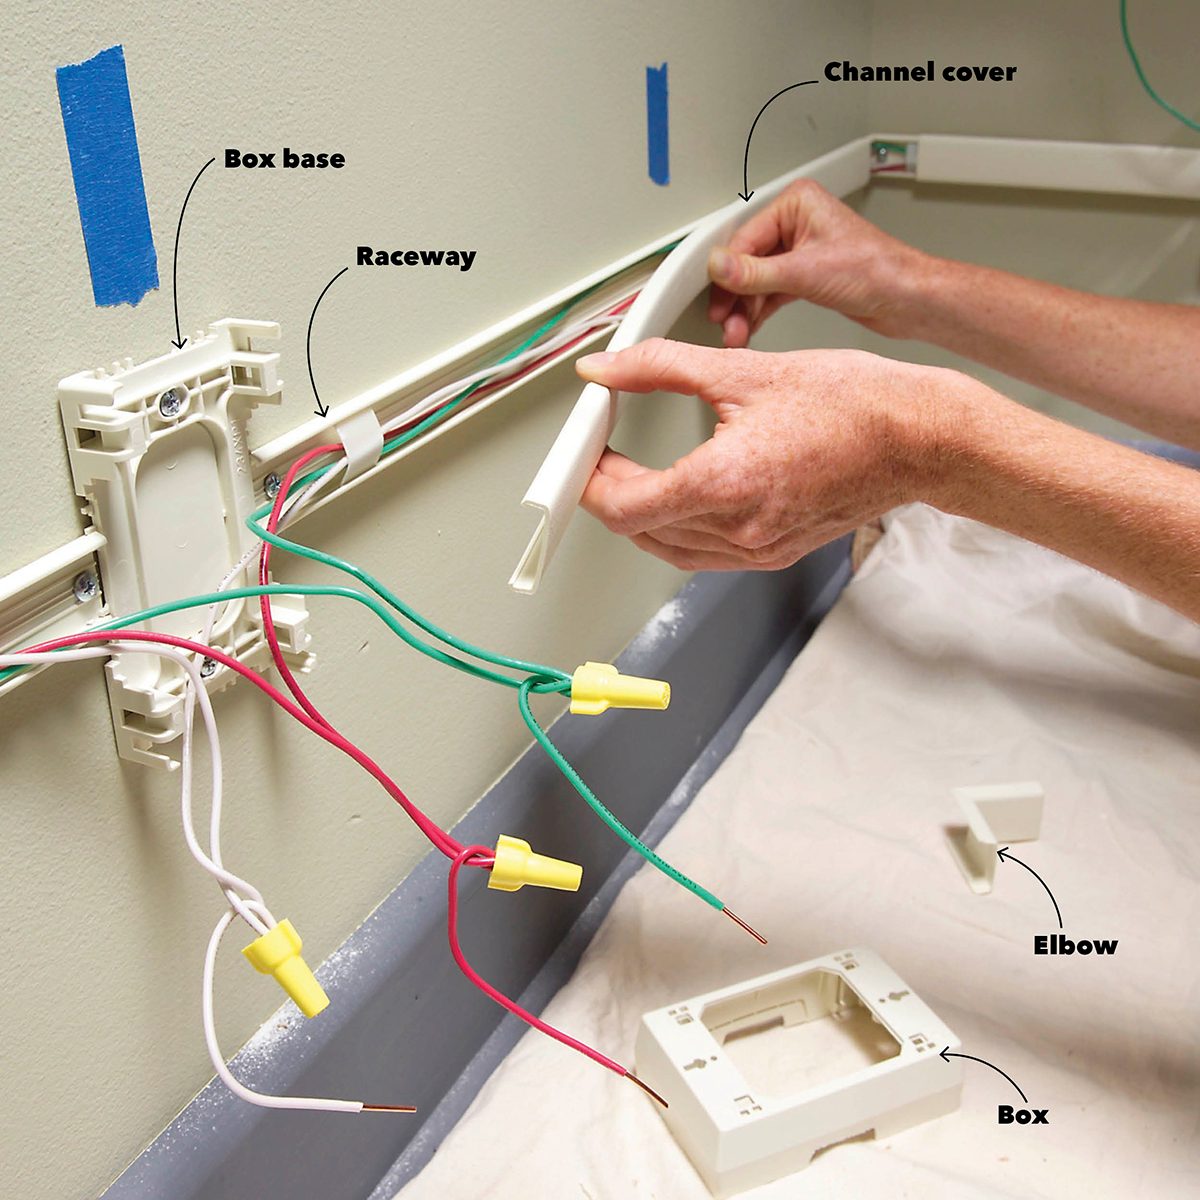 How to Fish Wire Through Walls: An In-Depth Guide - Rack-A-Tiers